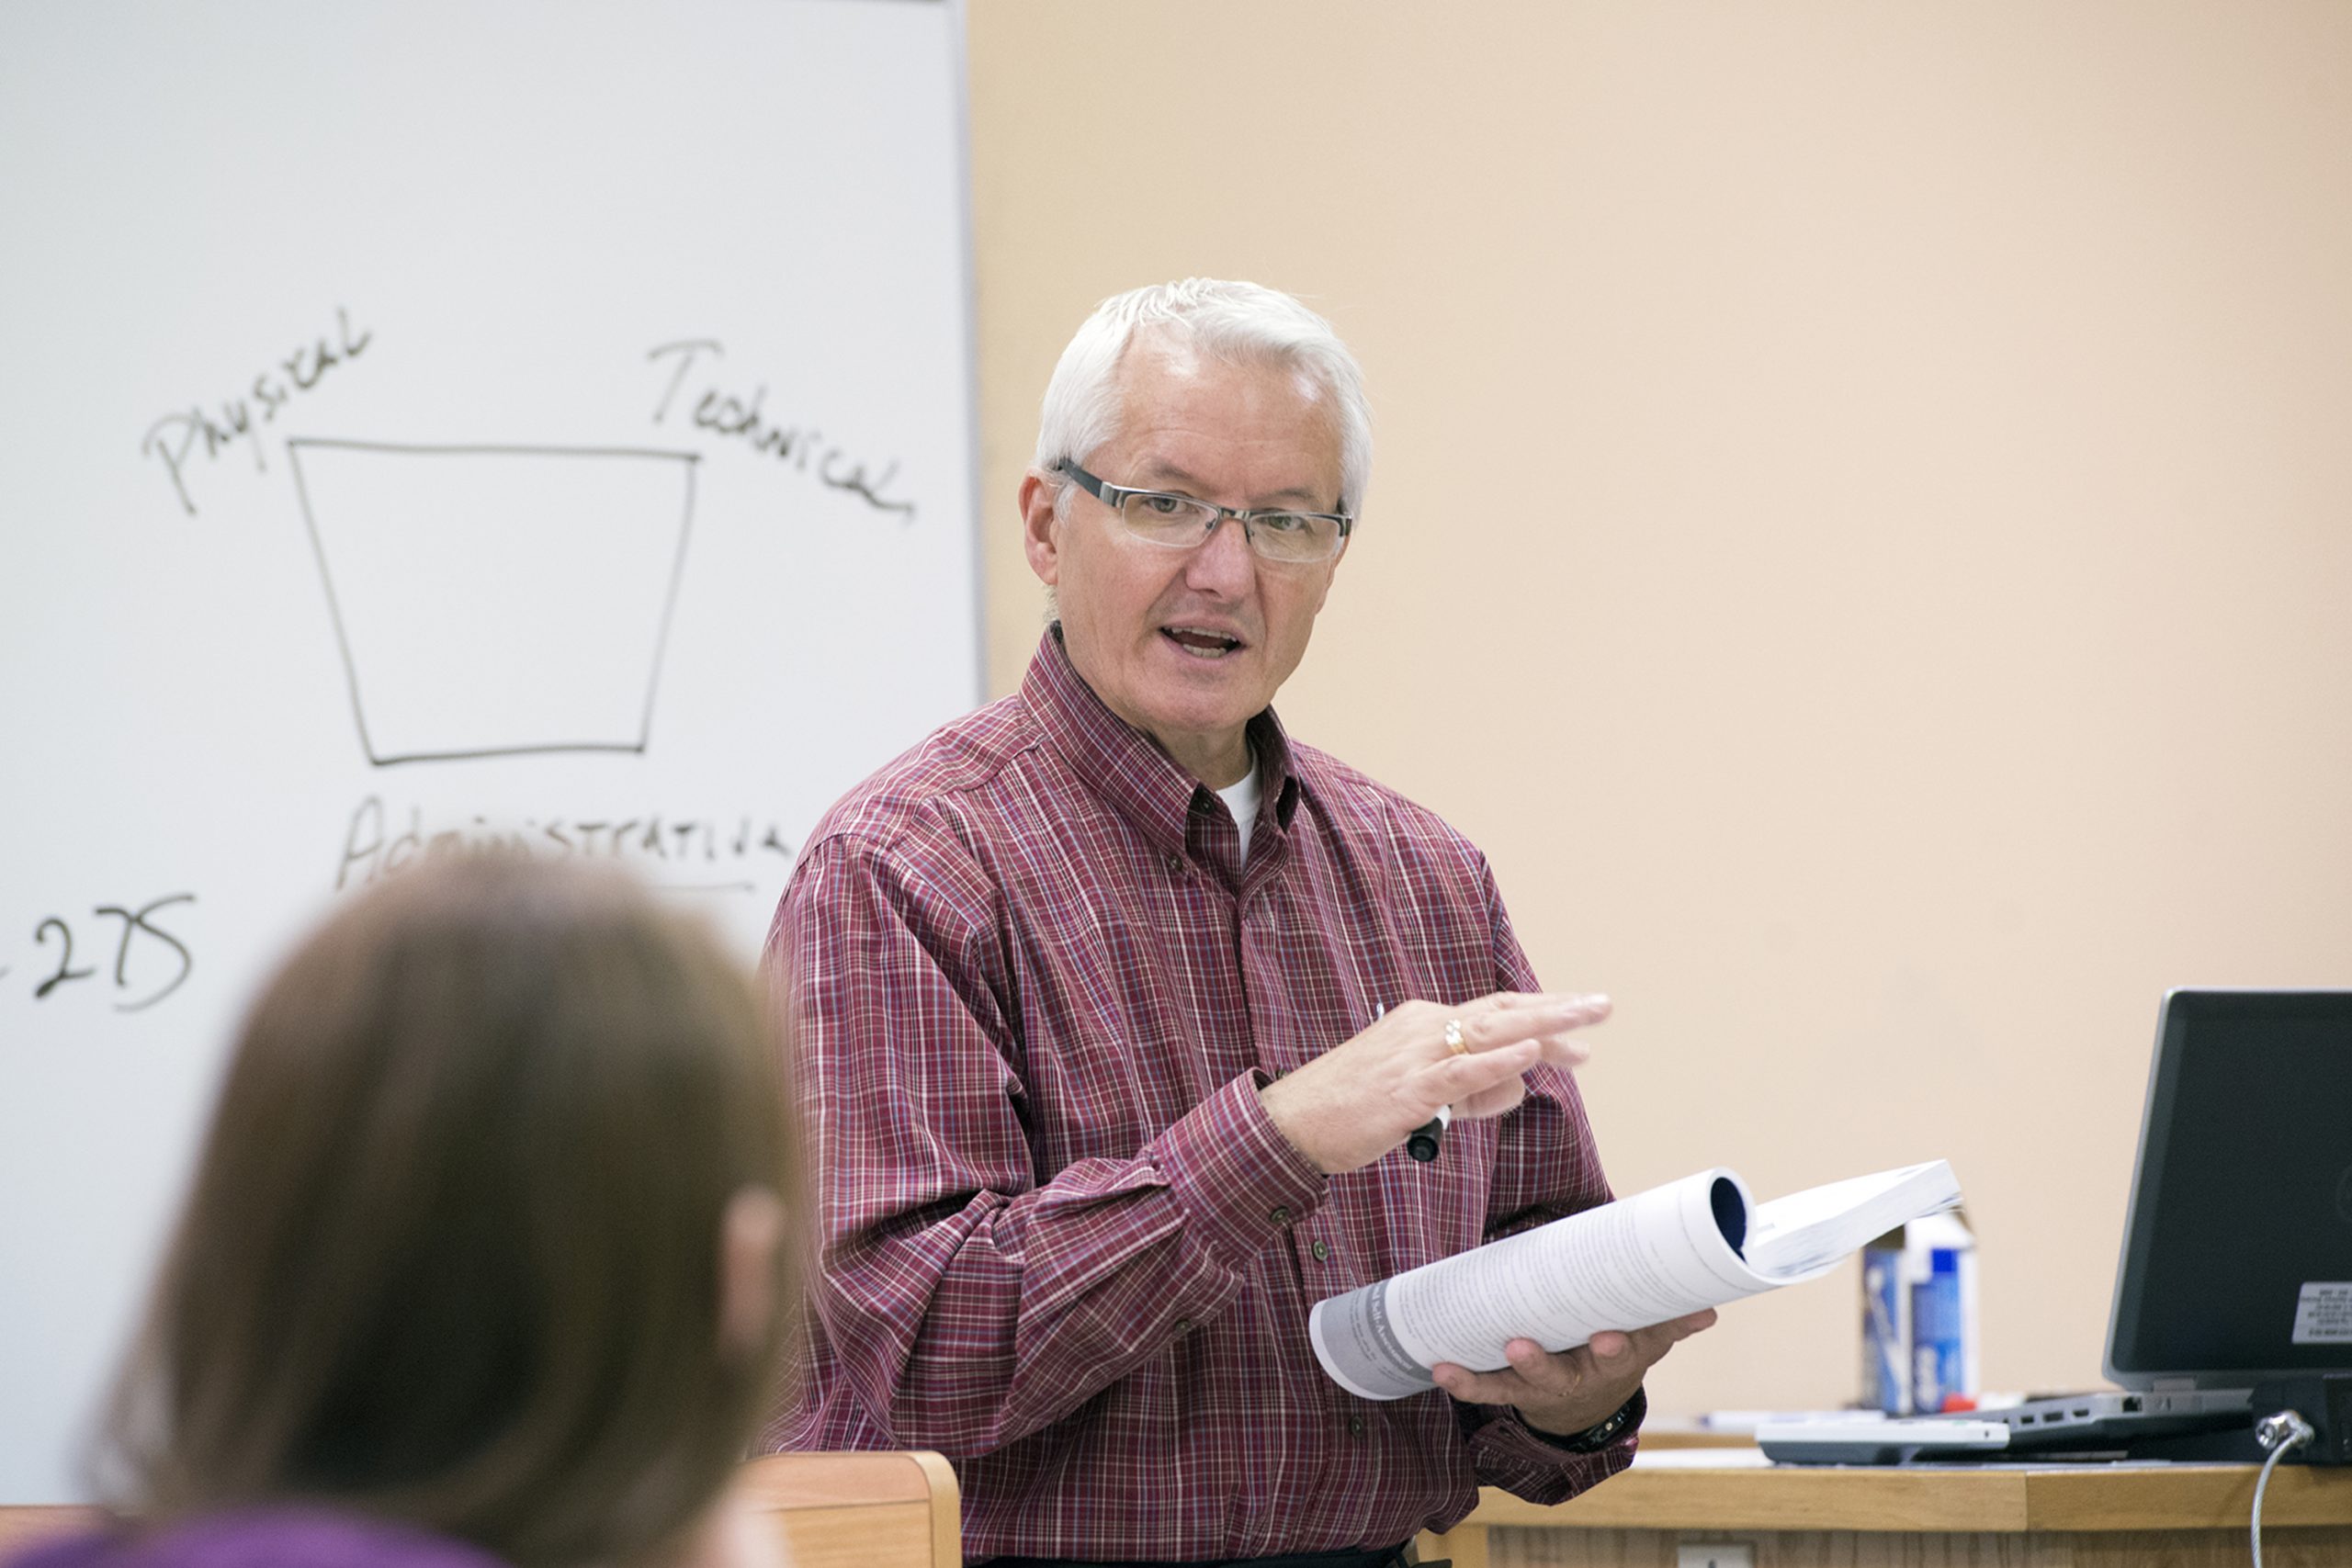 Dr. William Graves Teaching on a white board